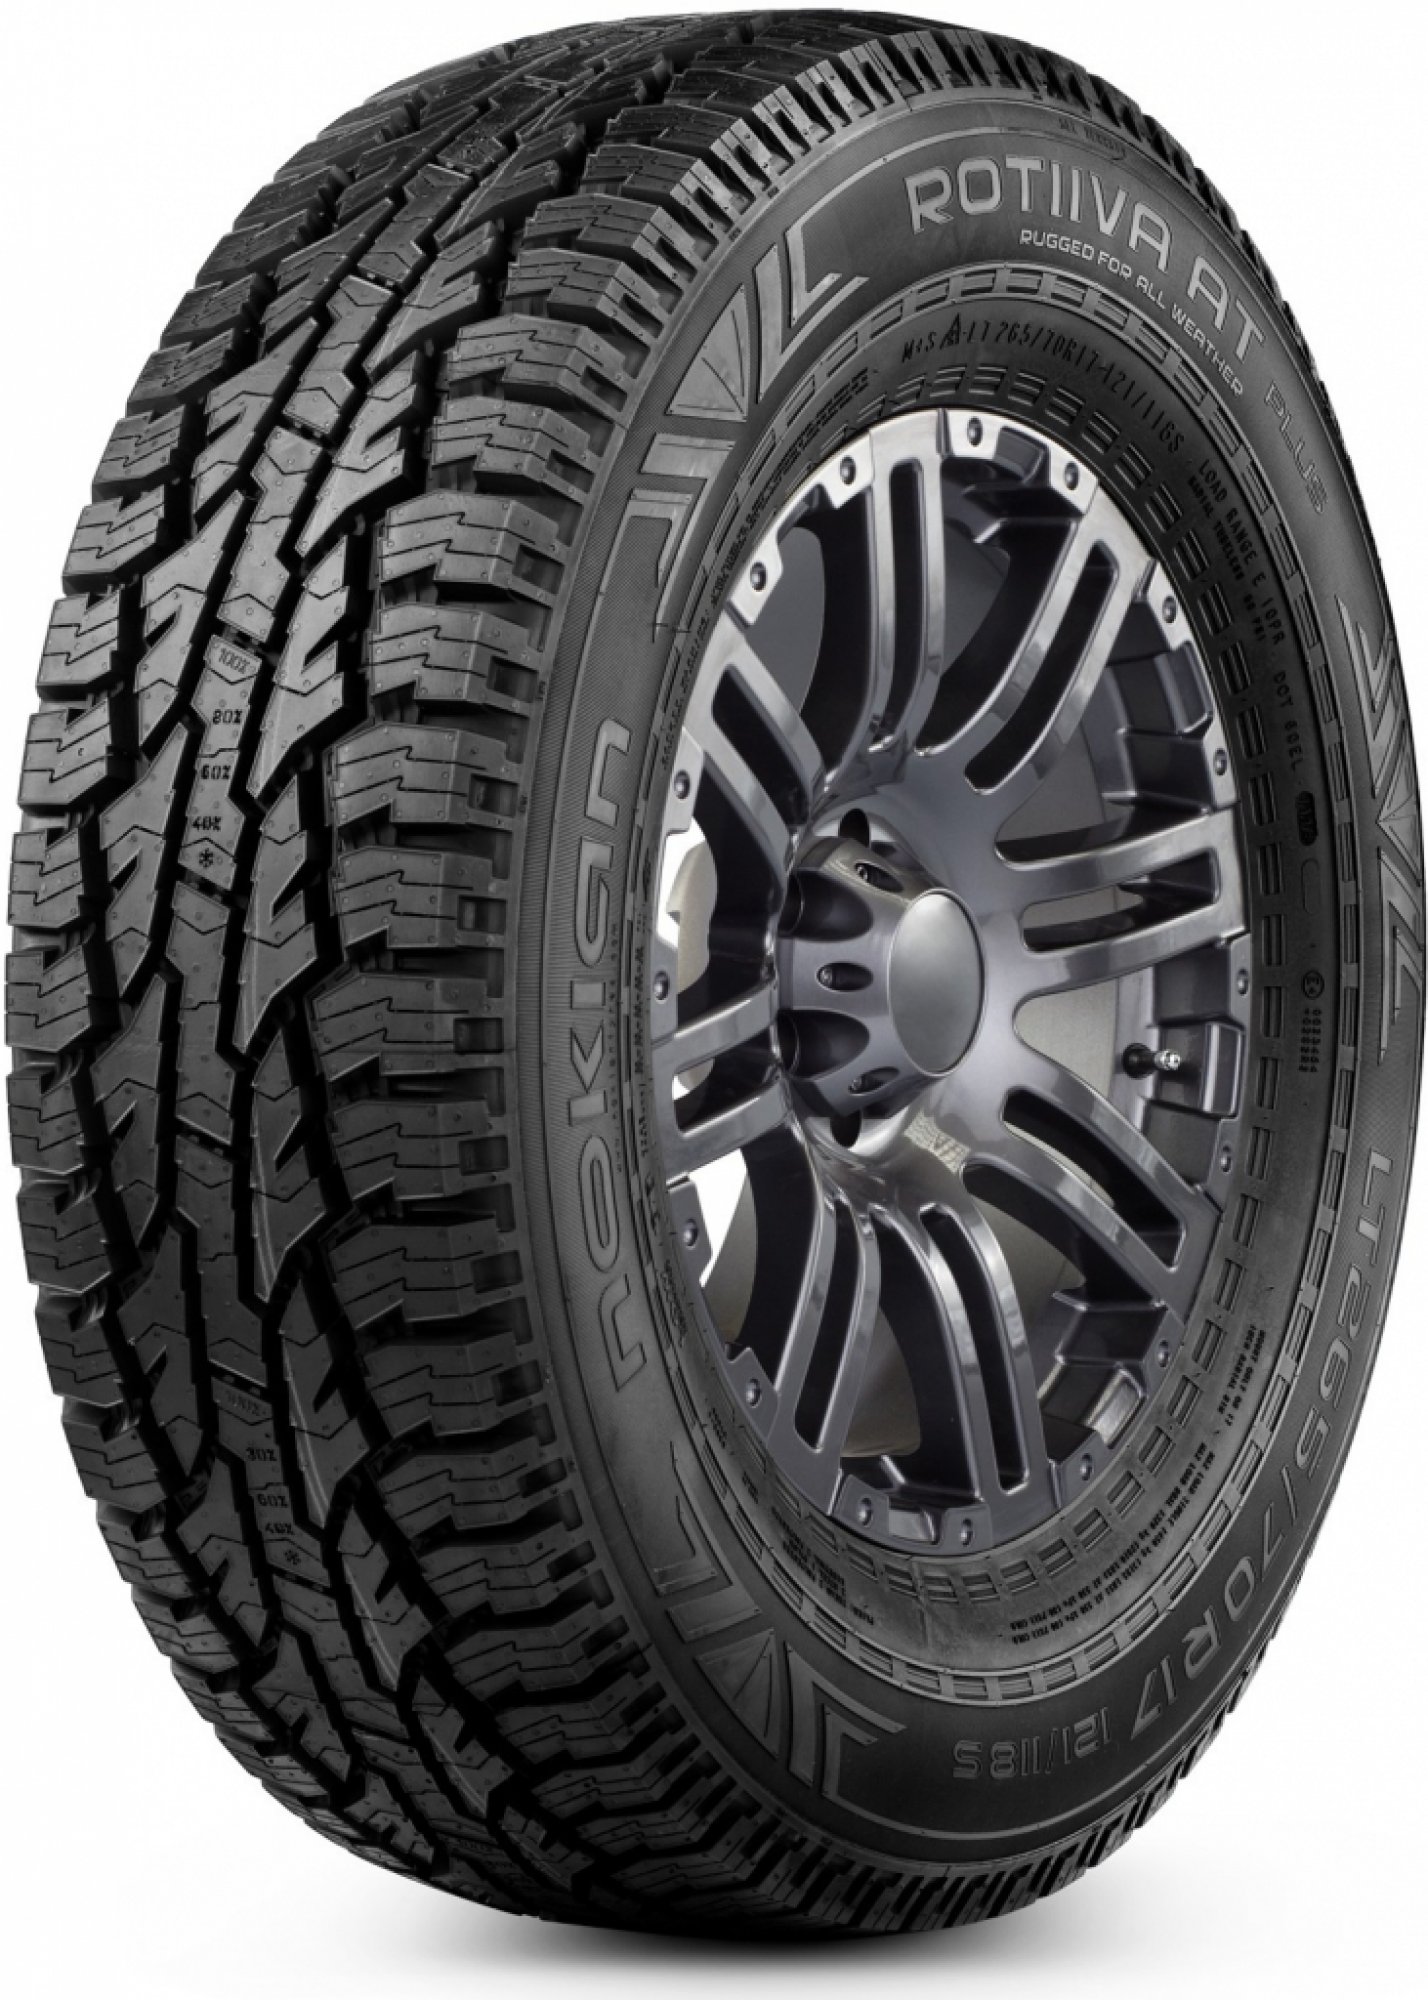 NOKIAN TYRES ROTIIVA AT PLUS 275/65 R 20 126/123S